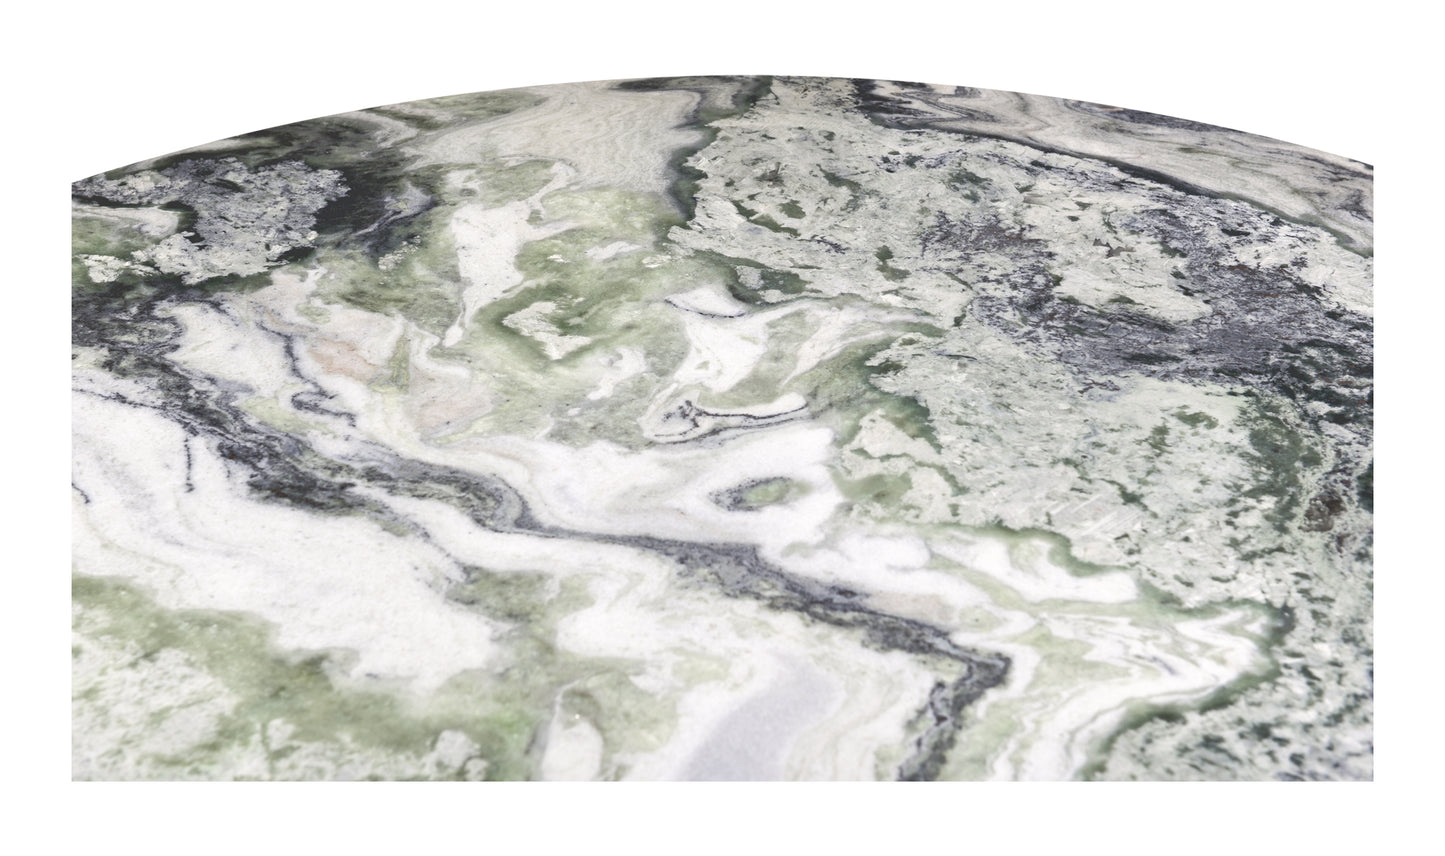 CELIA ROUND DINING TABLE GREEN ONYX MARBLE